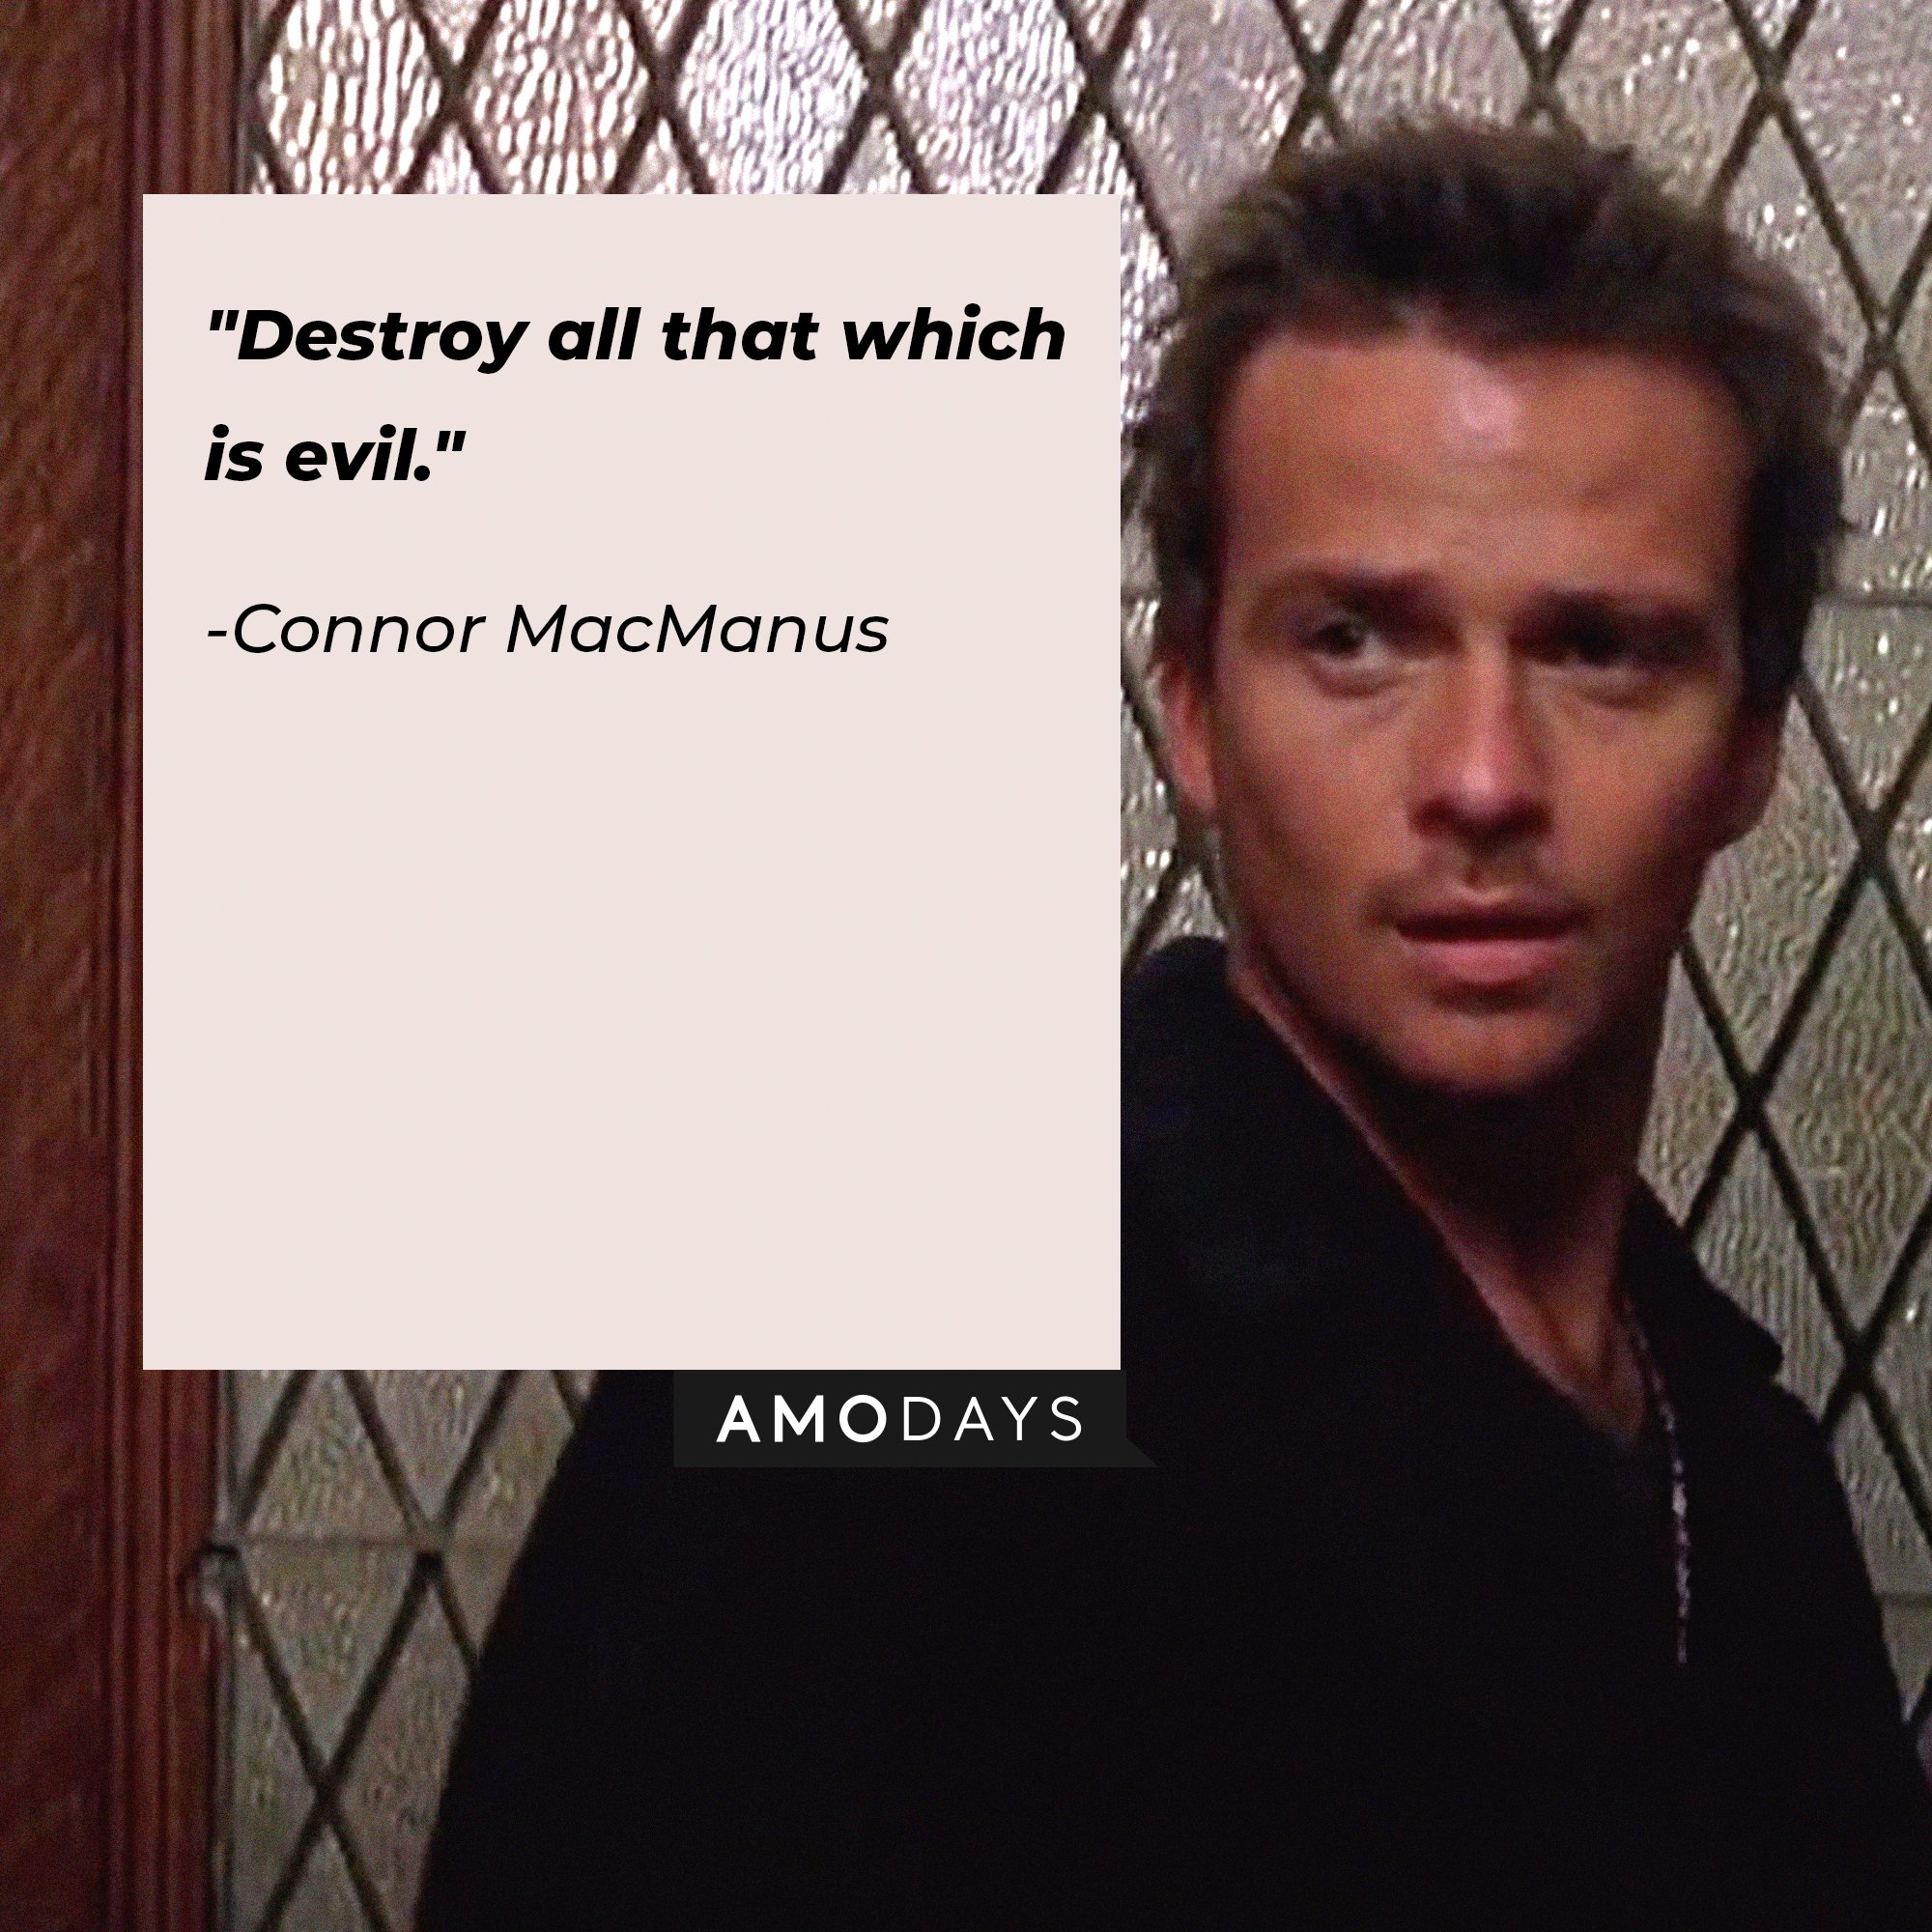 Connor MacManus' quote: "Destroy all that which is evil." | Image: AmoDays